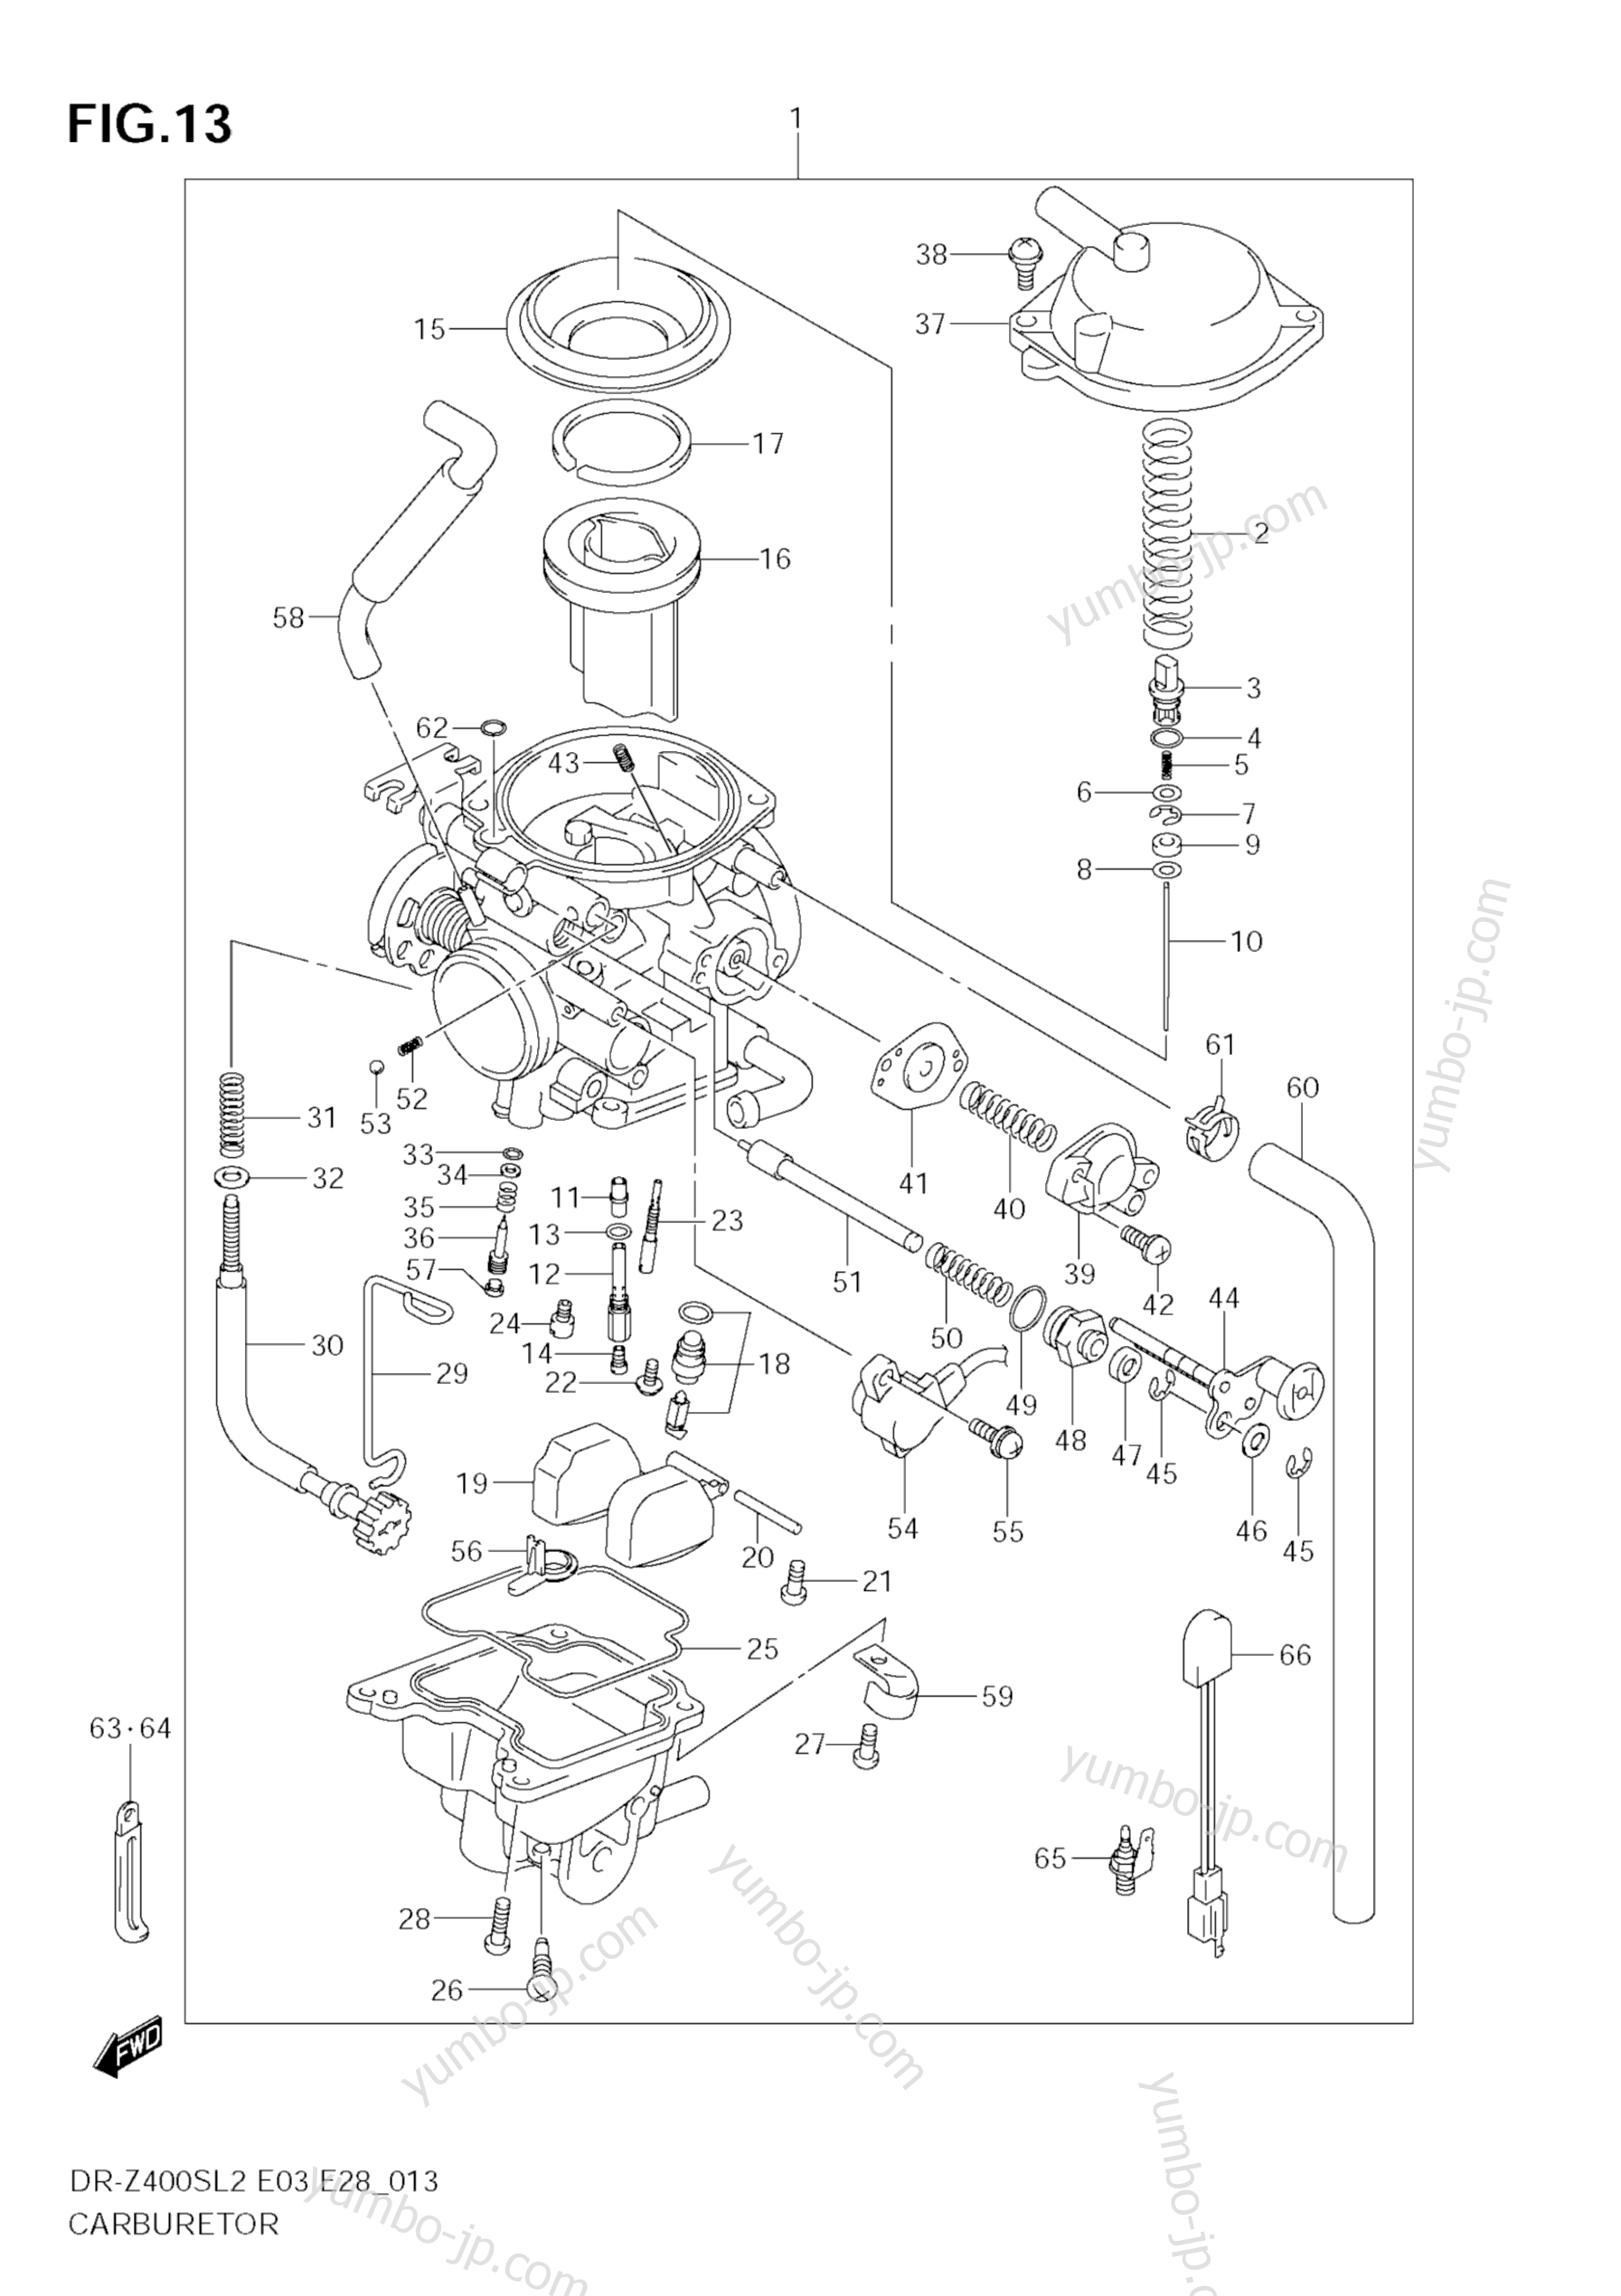 CARBURETOR (E28) for motorcycles SUZUKI DR-Z400S 2012 year